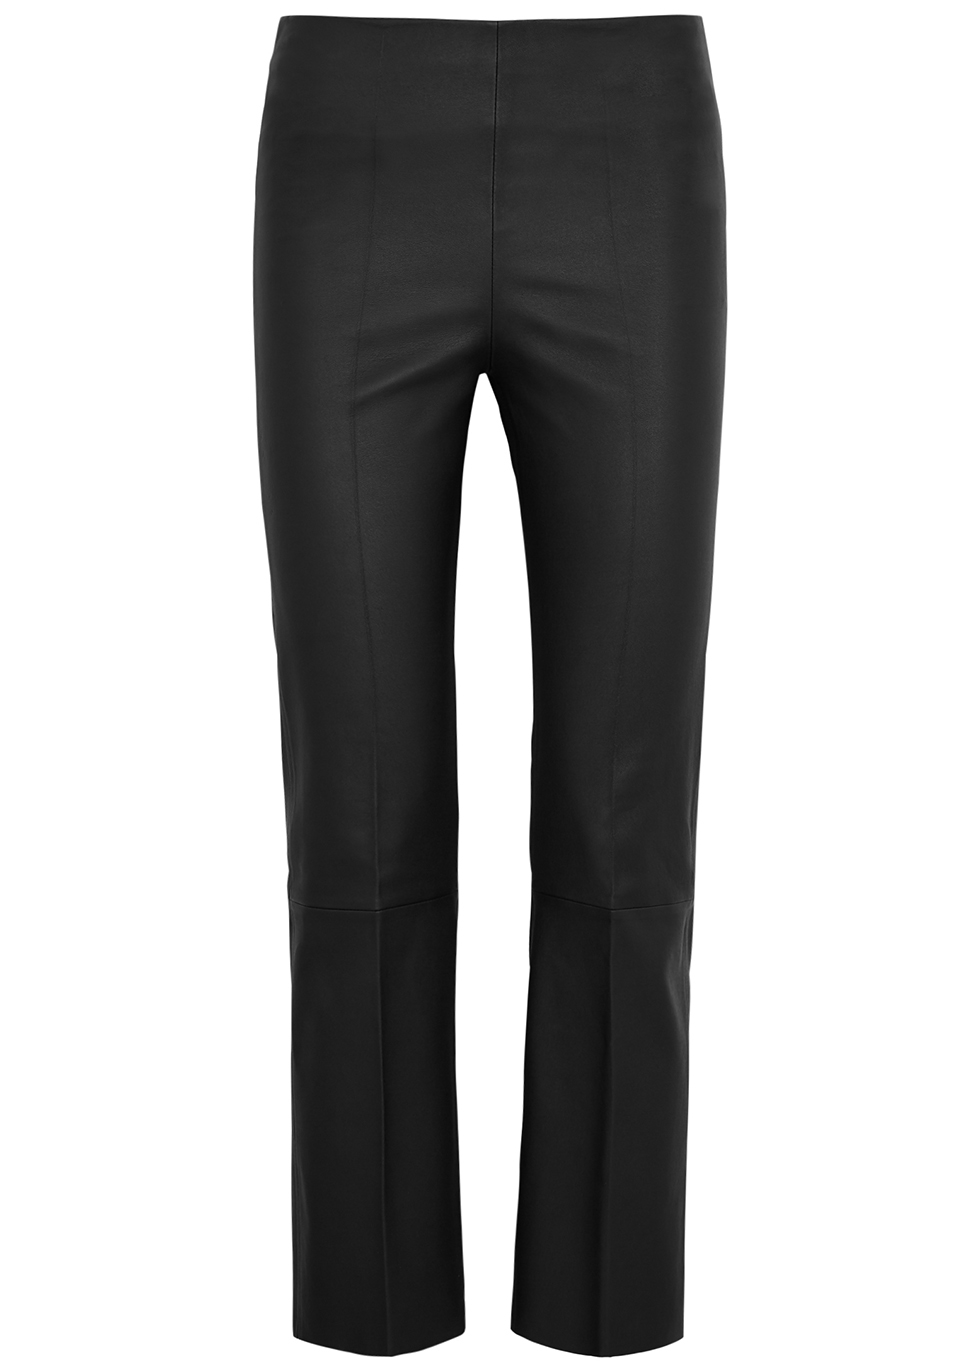 BY MALENE BIRGER Florentina cropped leather leggings